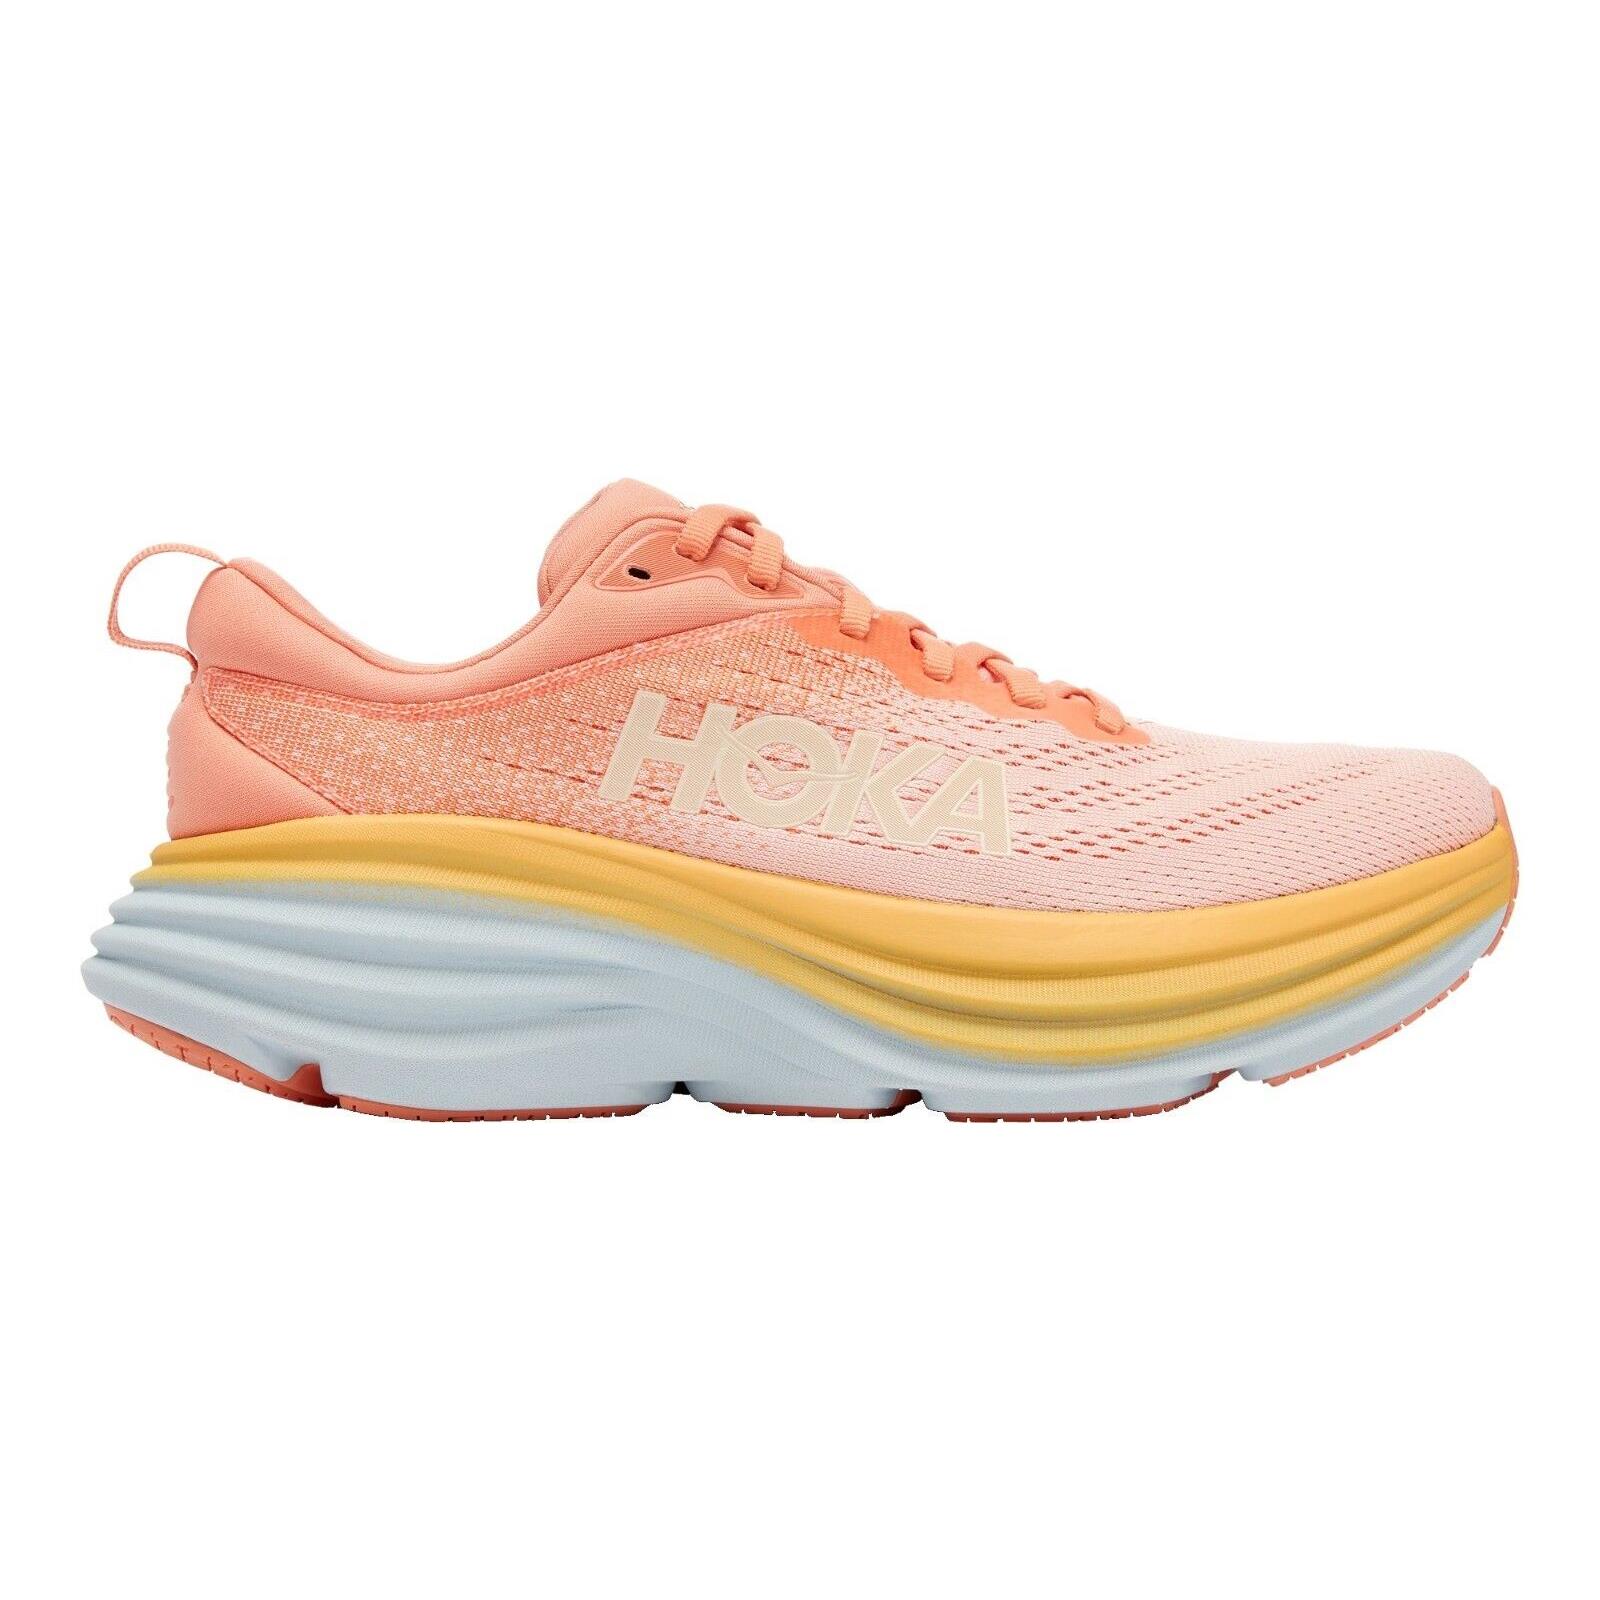 Hoka One One Bondi 8 Running Shoes Women`s US Sizes 6-12 Colors Available Shell Coral / Peach Parfait